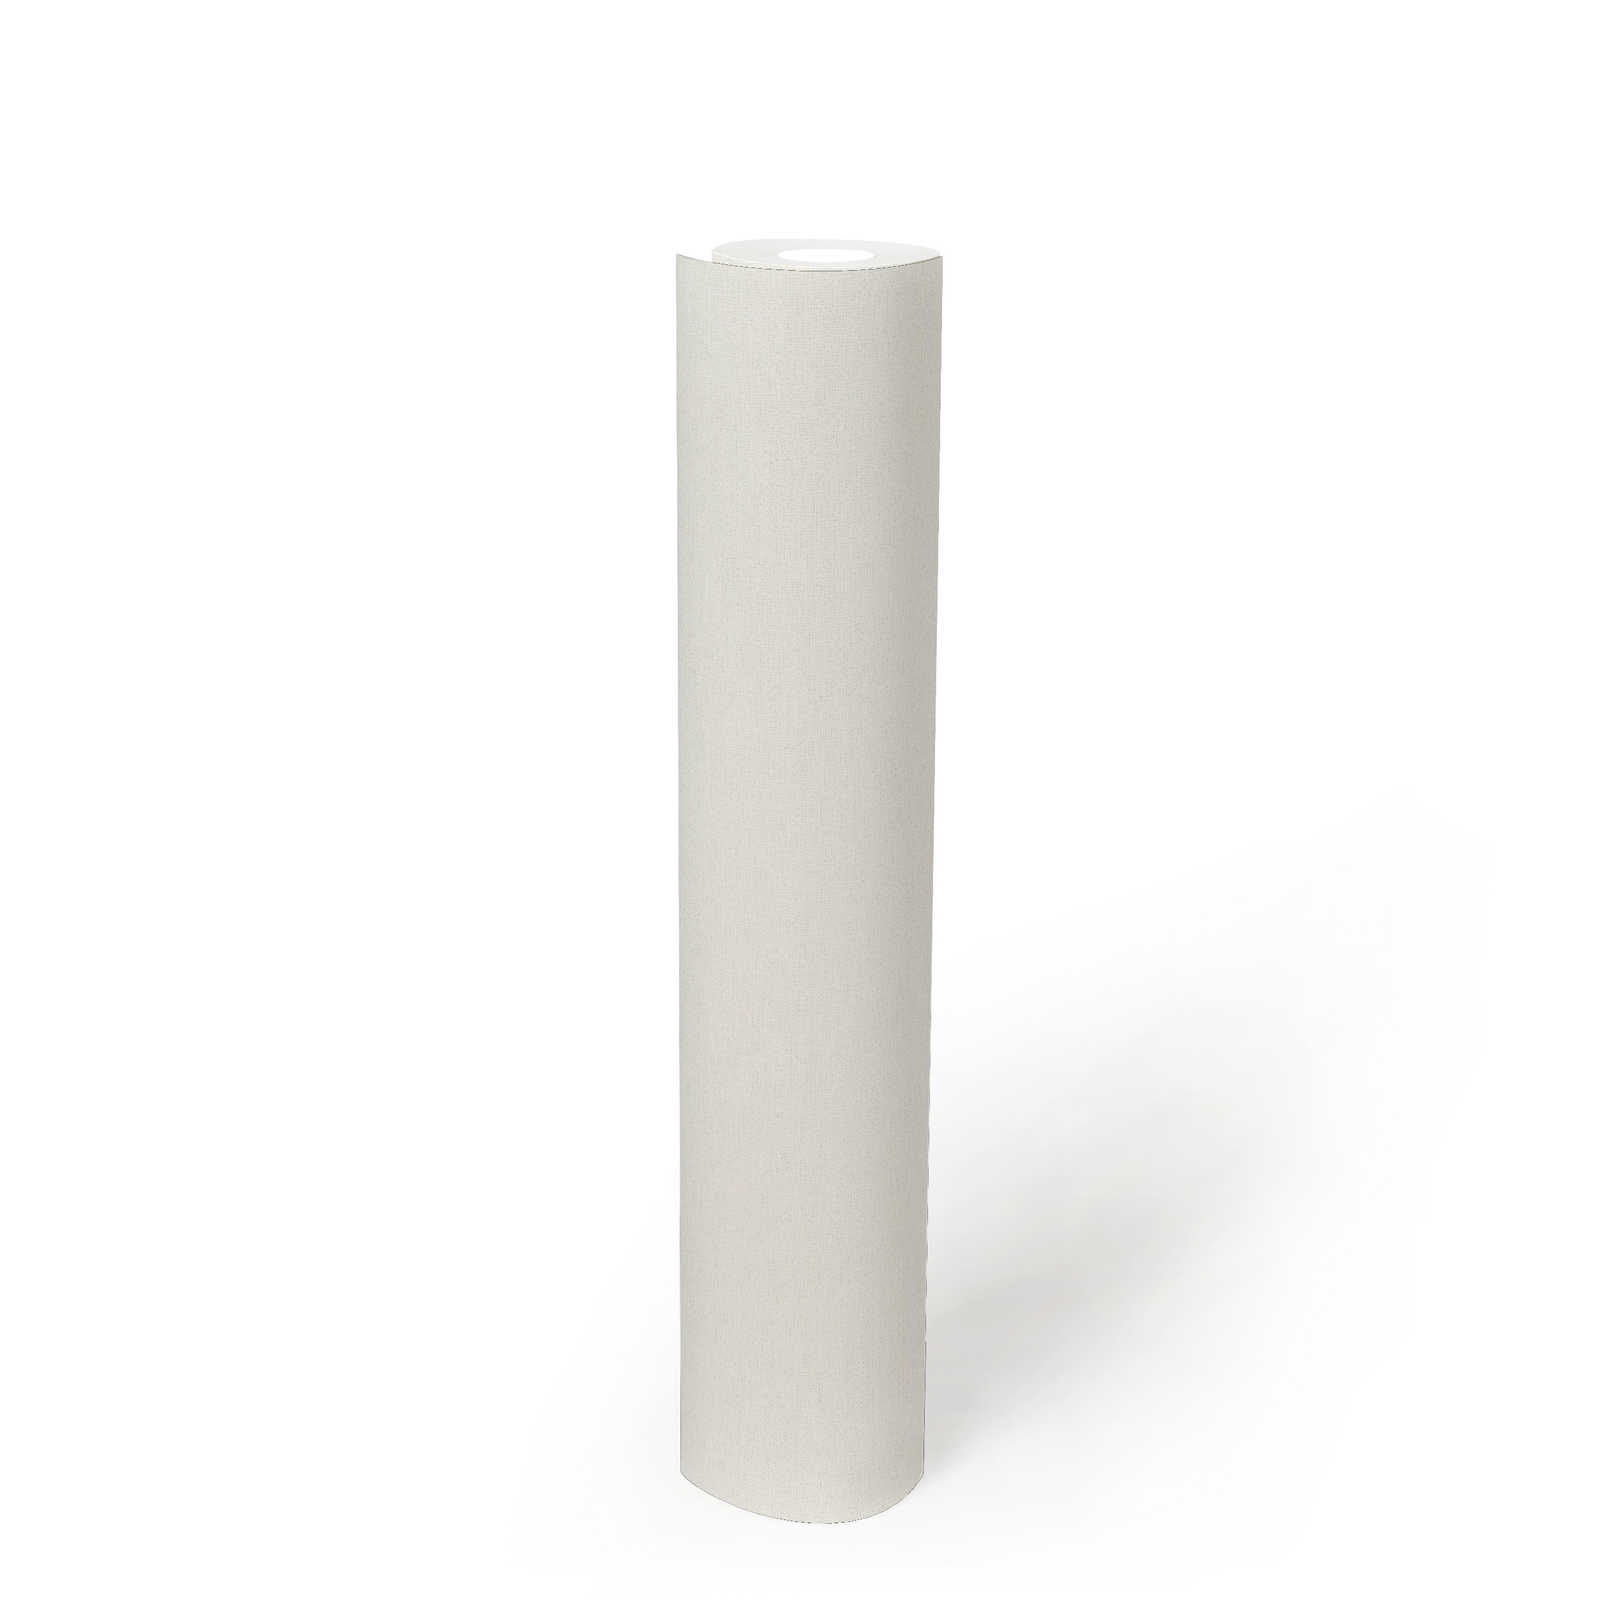             Plain wallpaper pure white from MICHALSKY
        